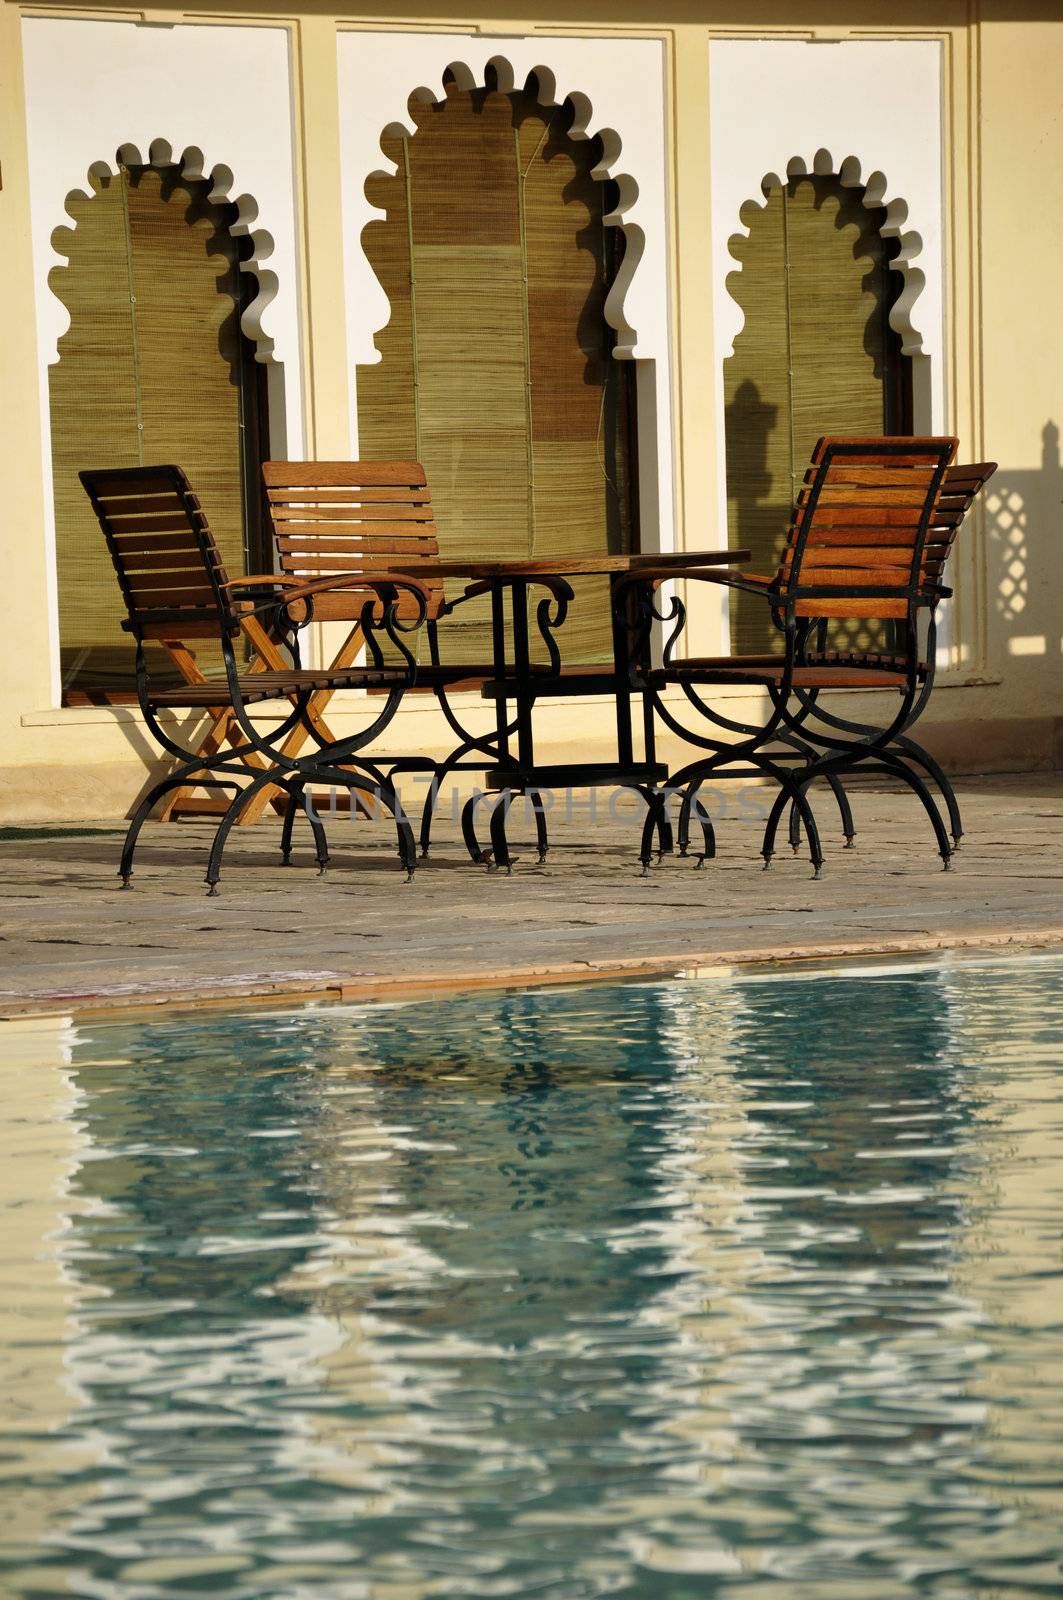 Wooden chairs by a swimming pool around architecture reflecting the ancient heritage of Udaipur, India